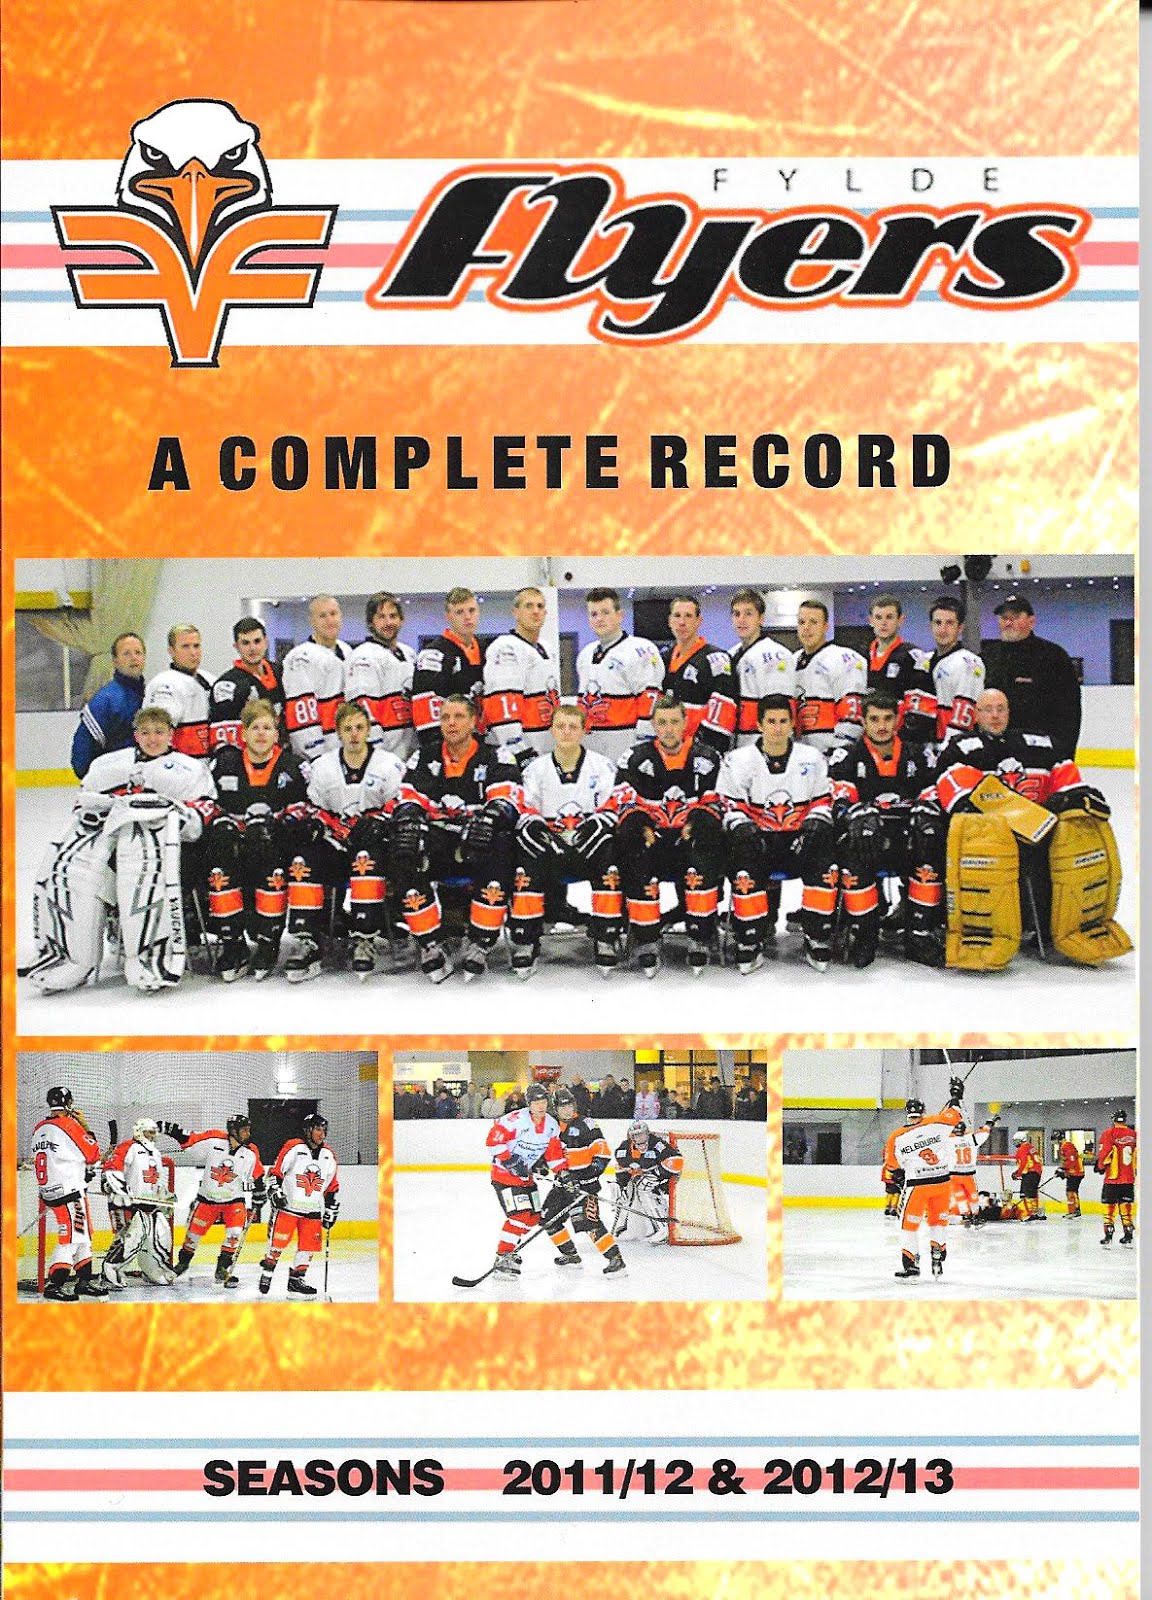 New Fylde Flyers Book - Available Now!